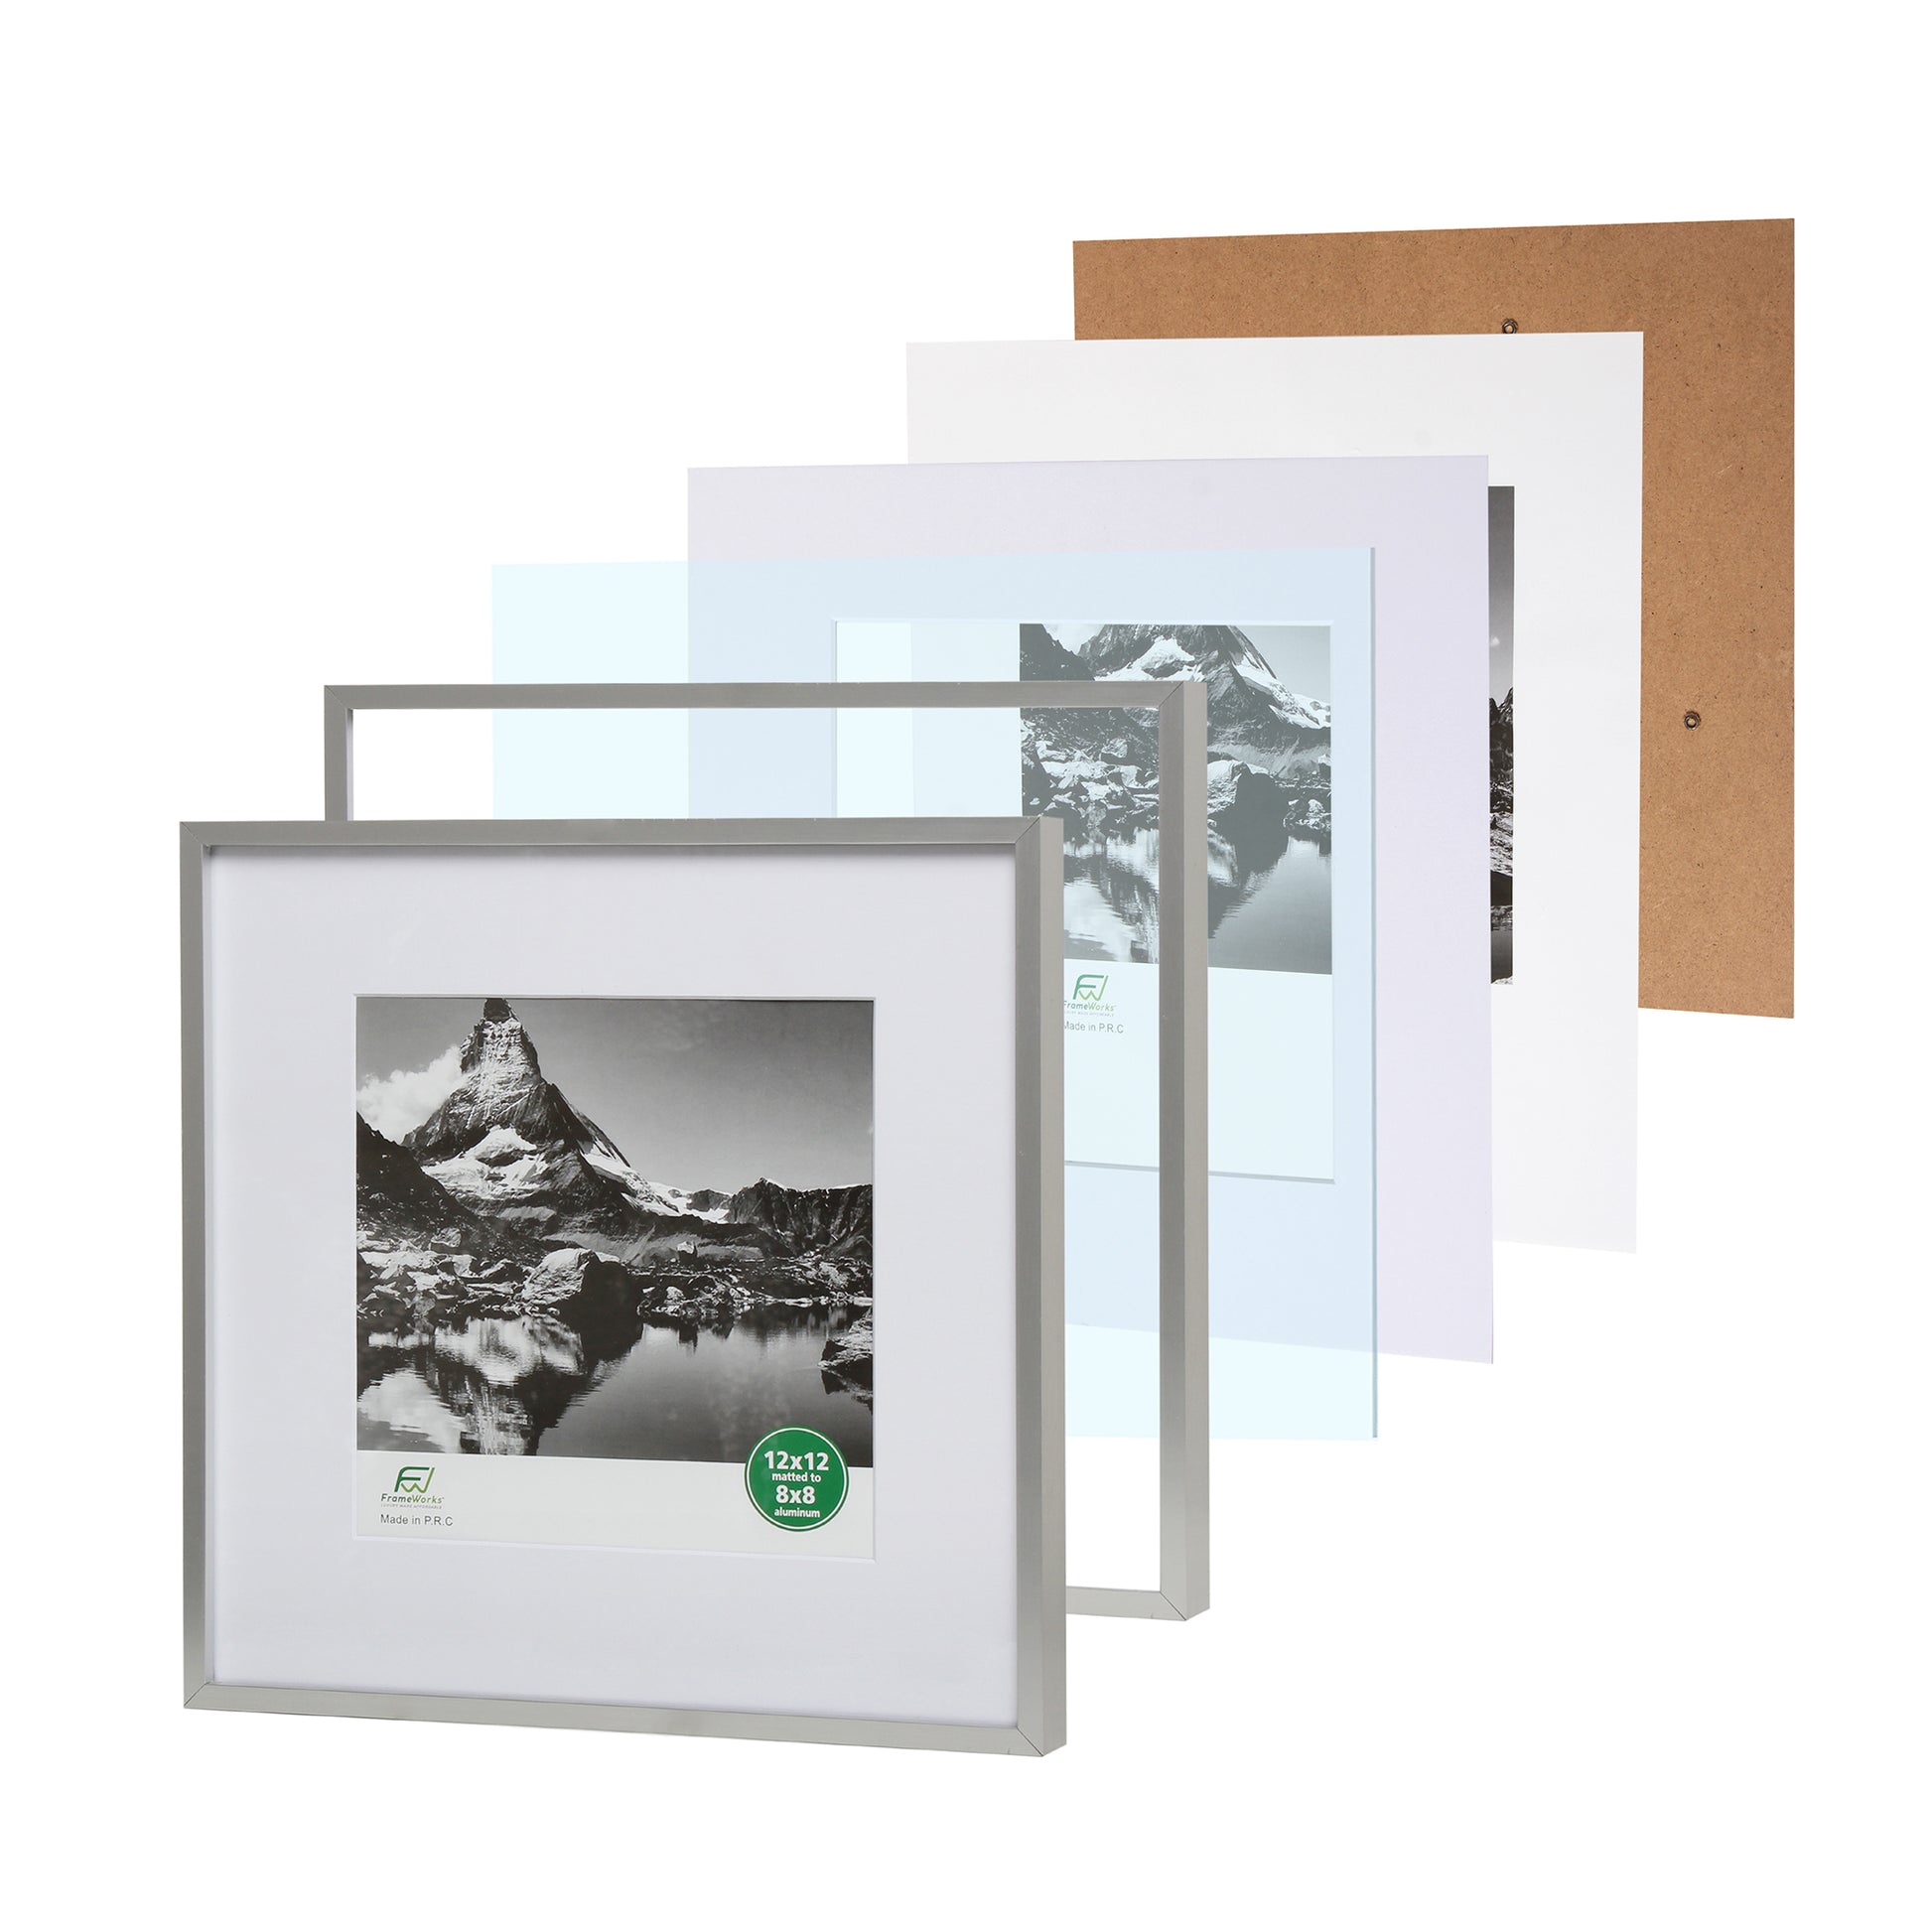 12 x 12 Deluxe Silver Aluminum Contemporary Picture Frame, 8 x 8 M –  FrameWorks